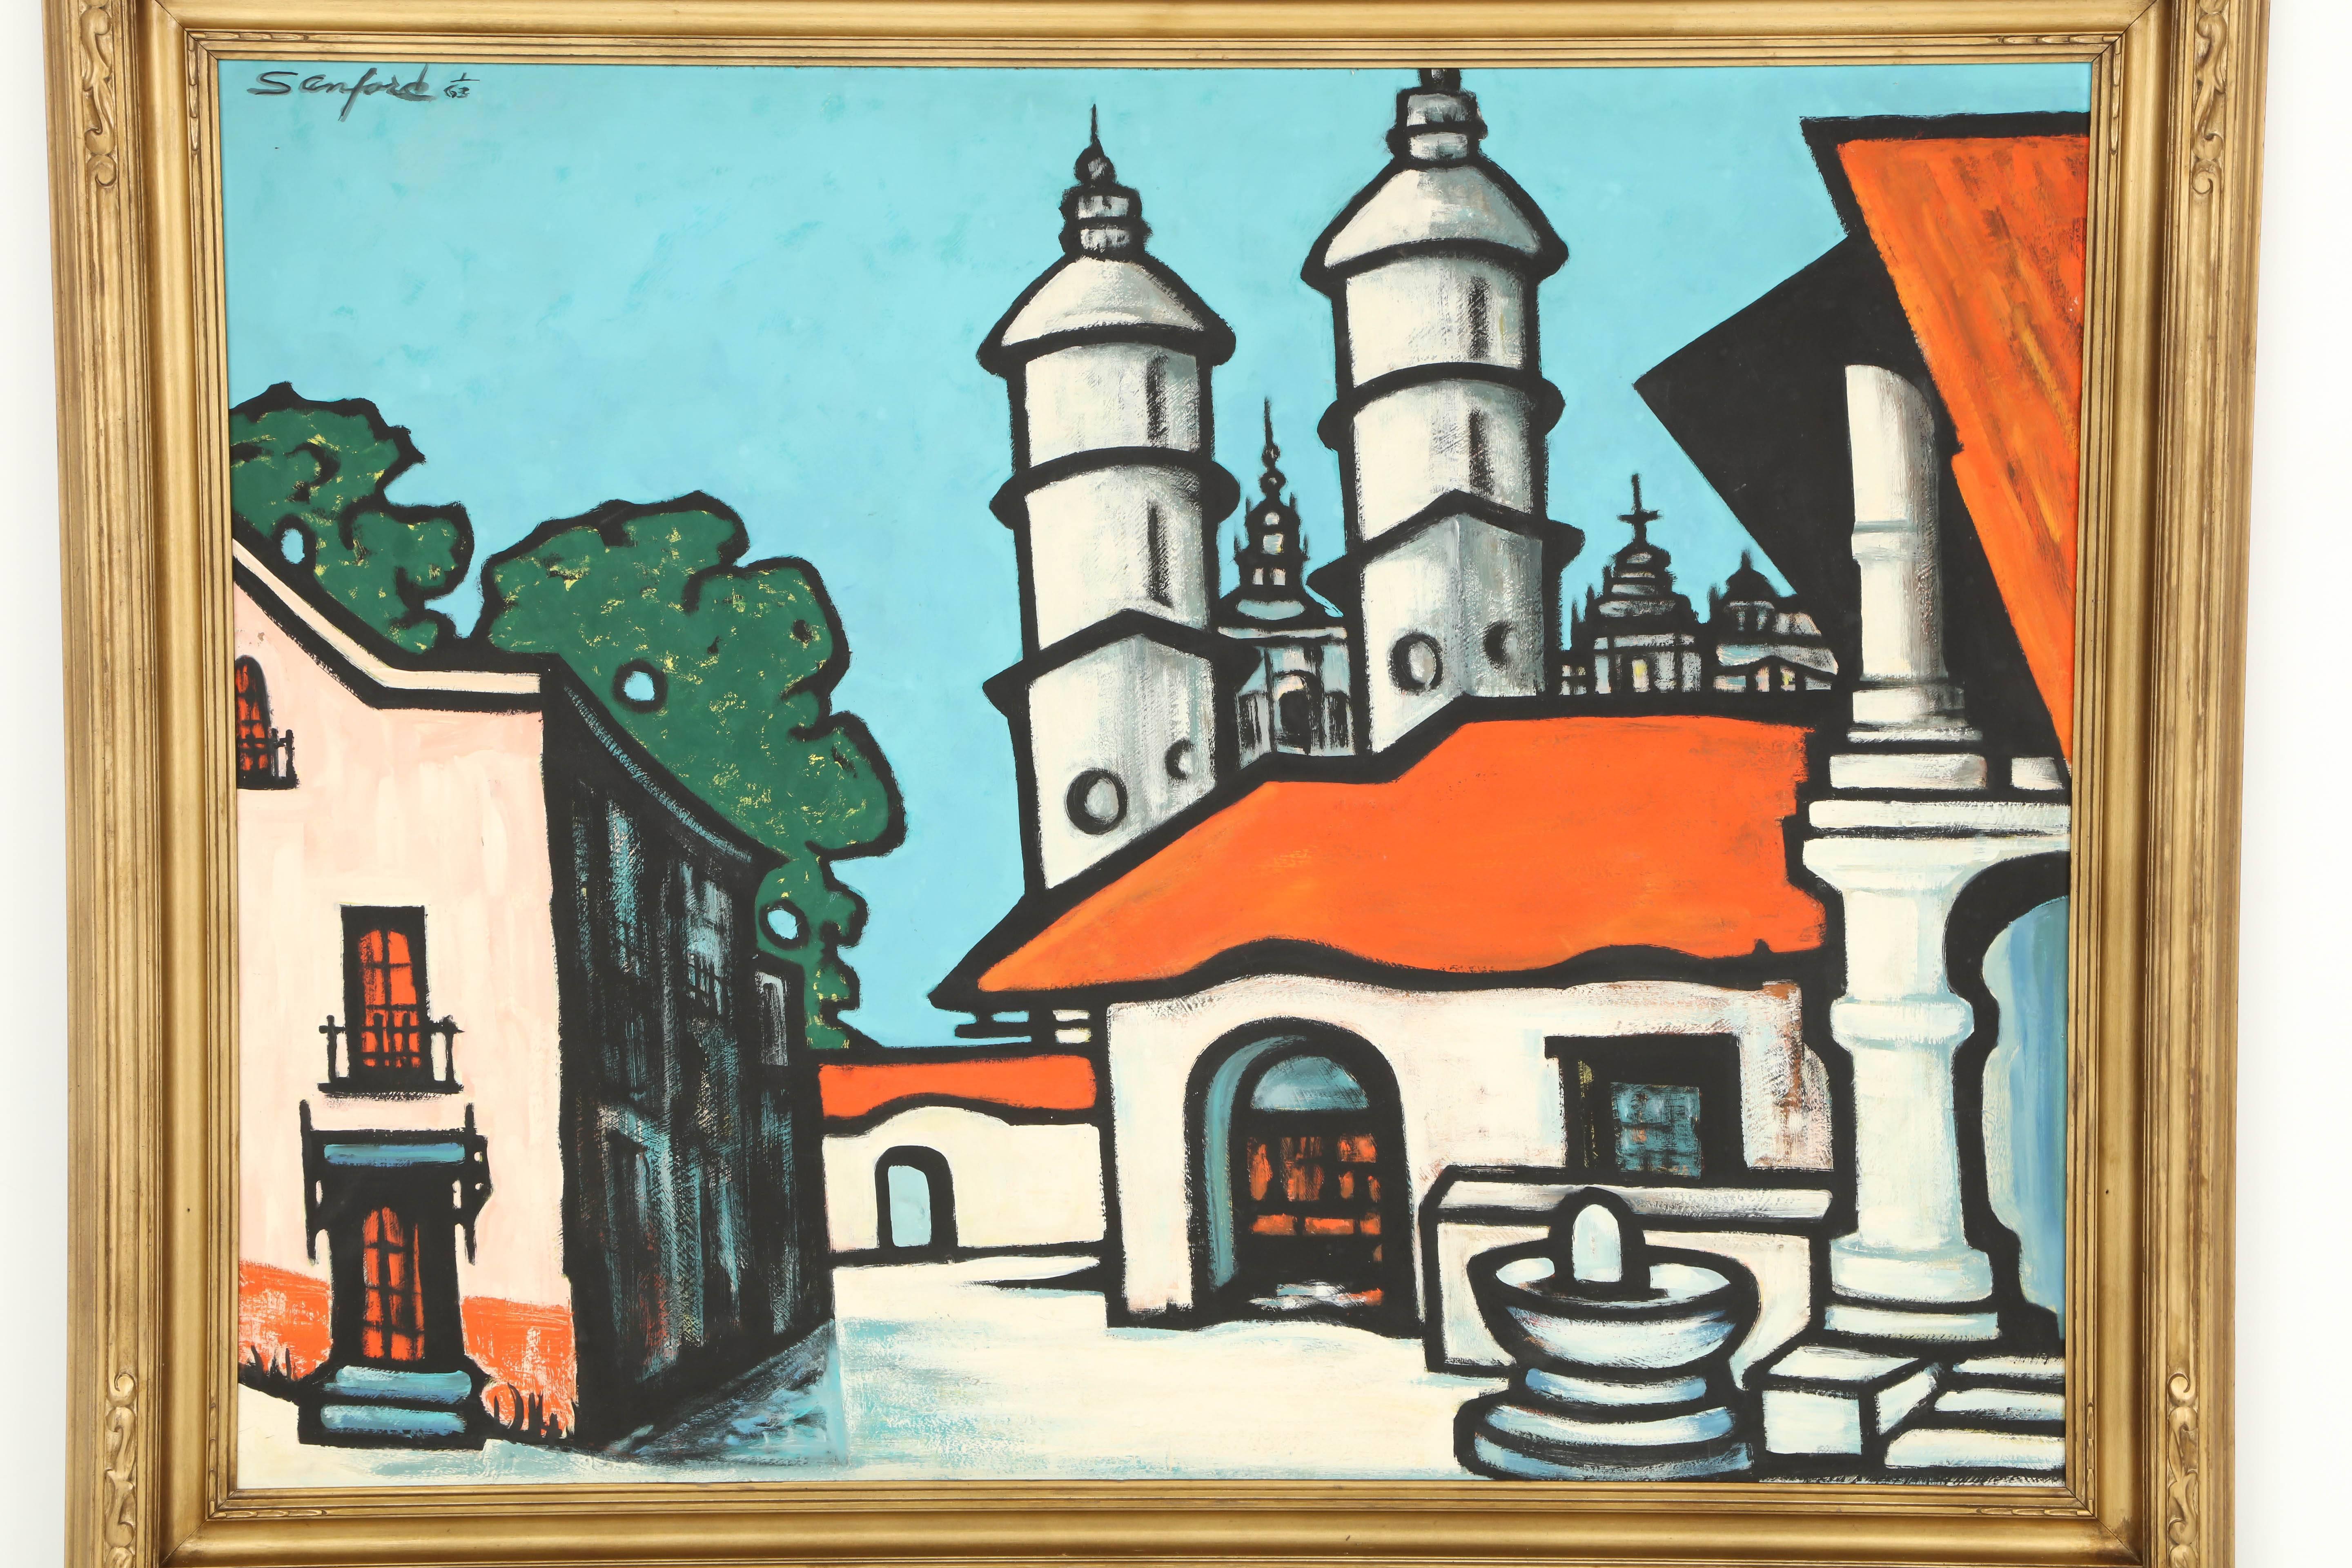 Decorative large oil painting by Sandford, circa 1963. Beautiful colors in a plaza of a village.